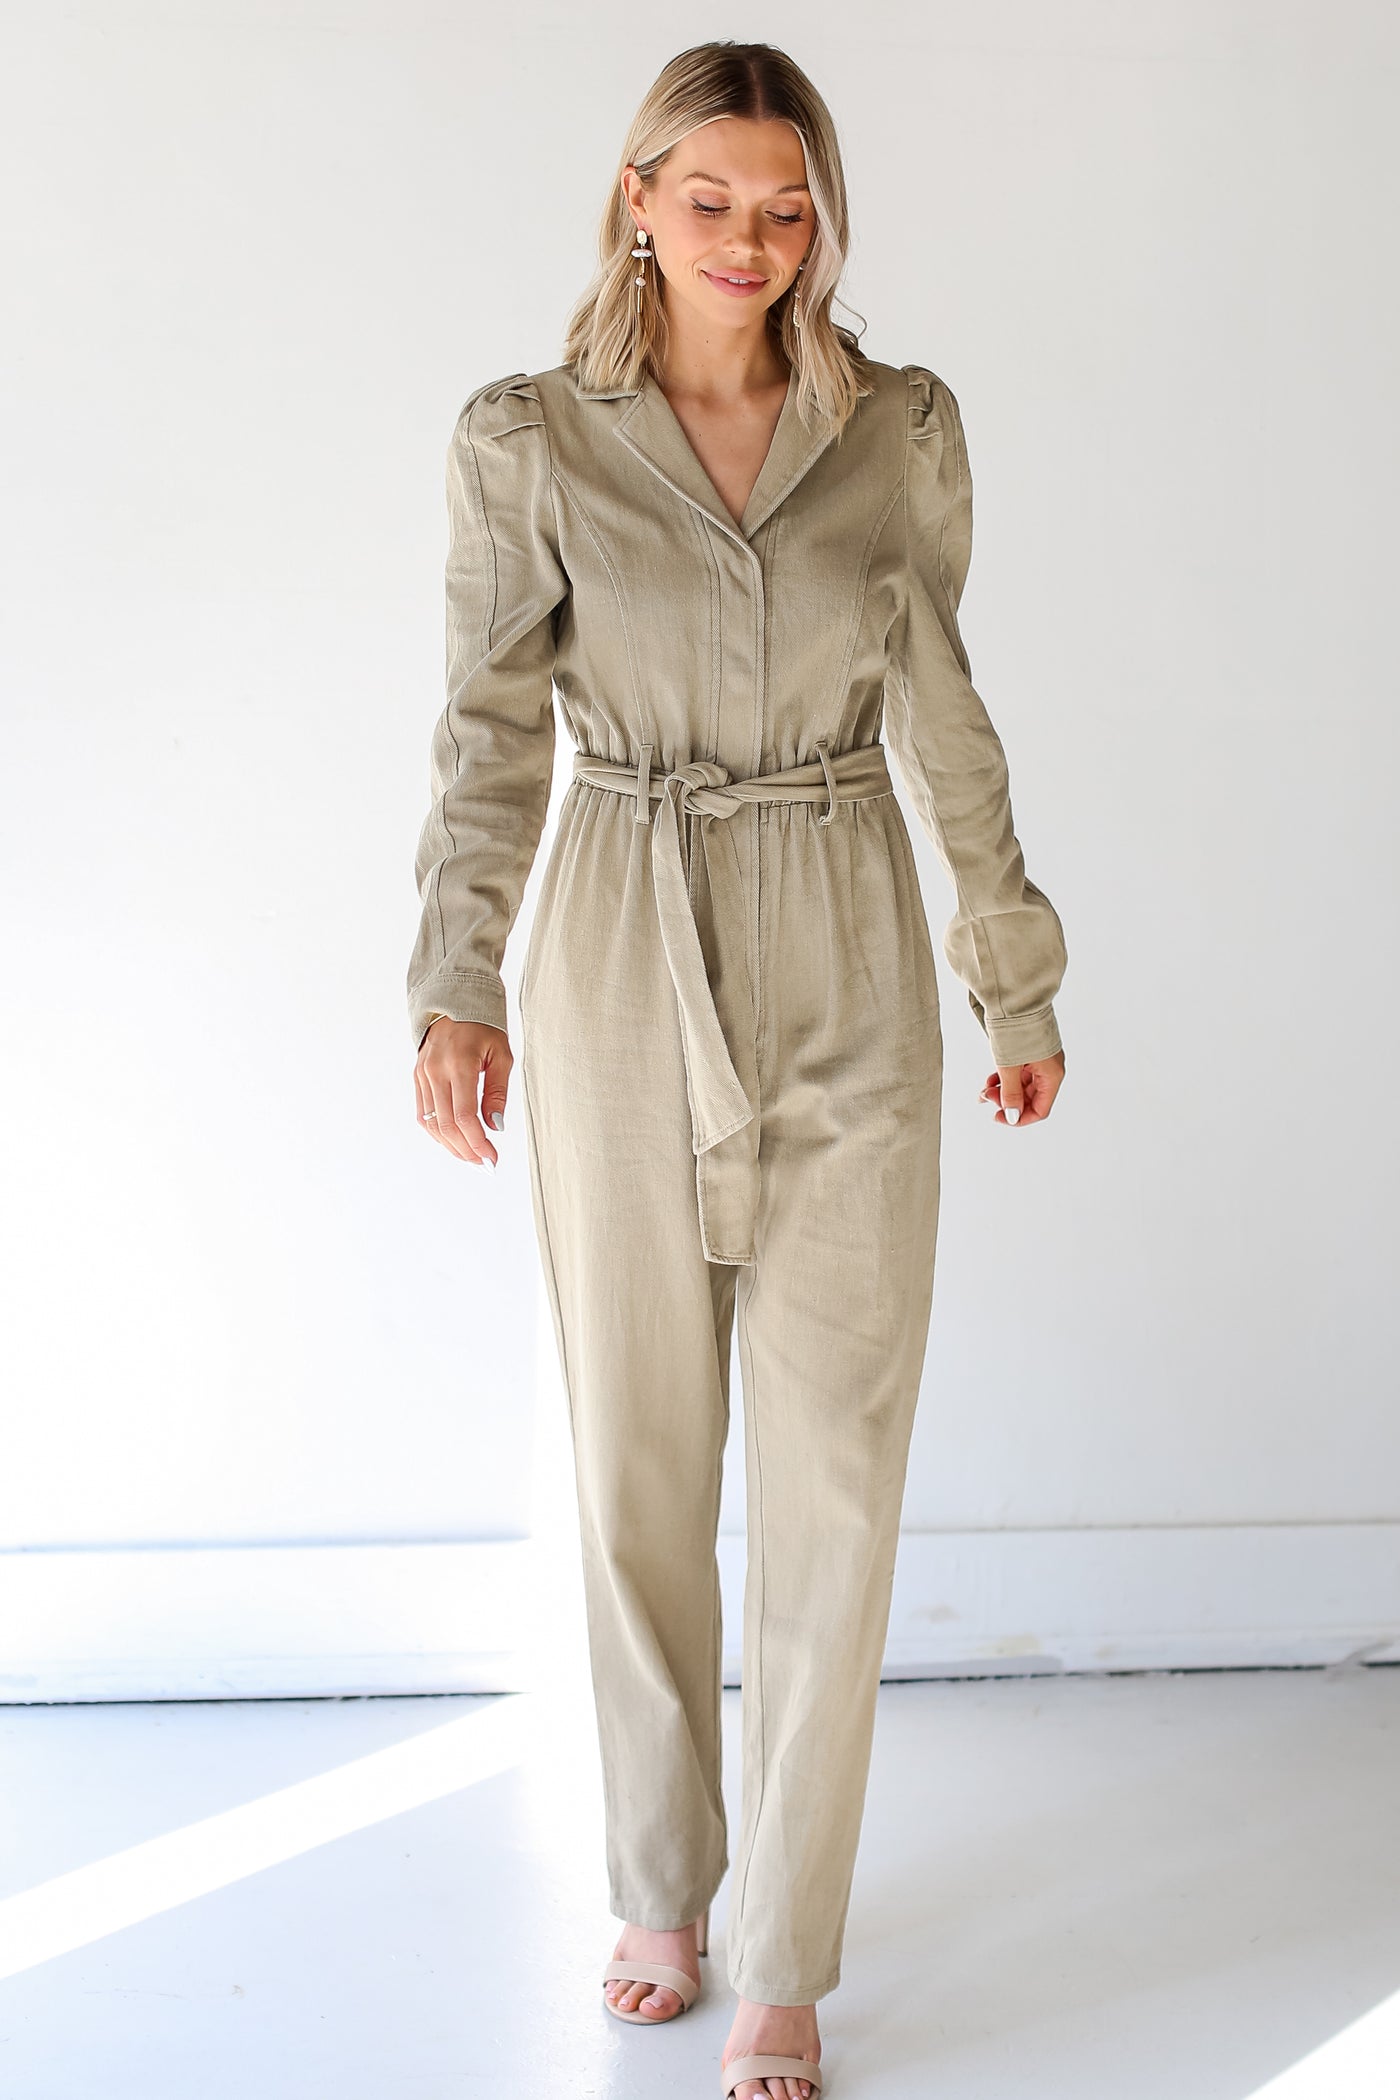 model wearing a taupe denim Jumpsuit